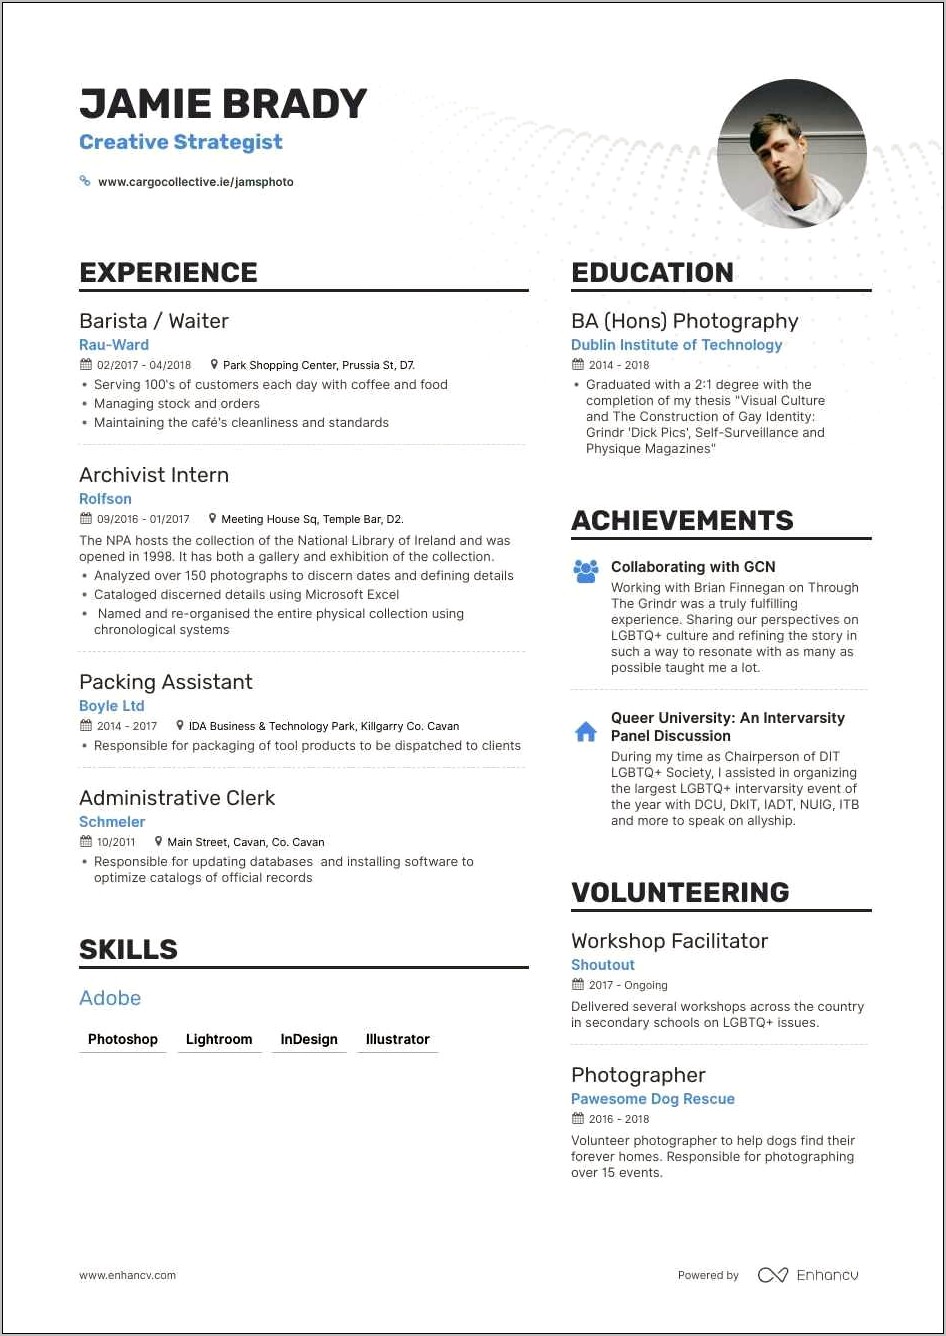 Example Of Resume For Administrative Clerk